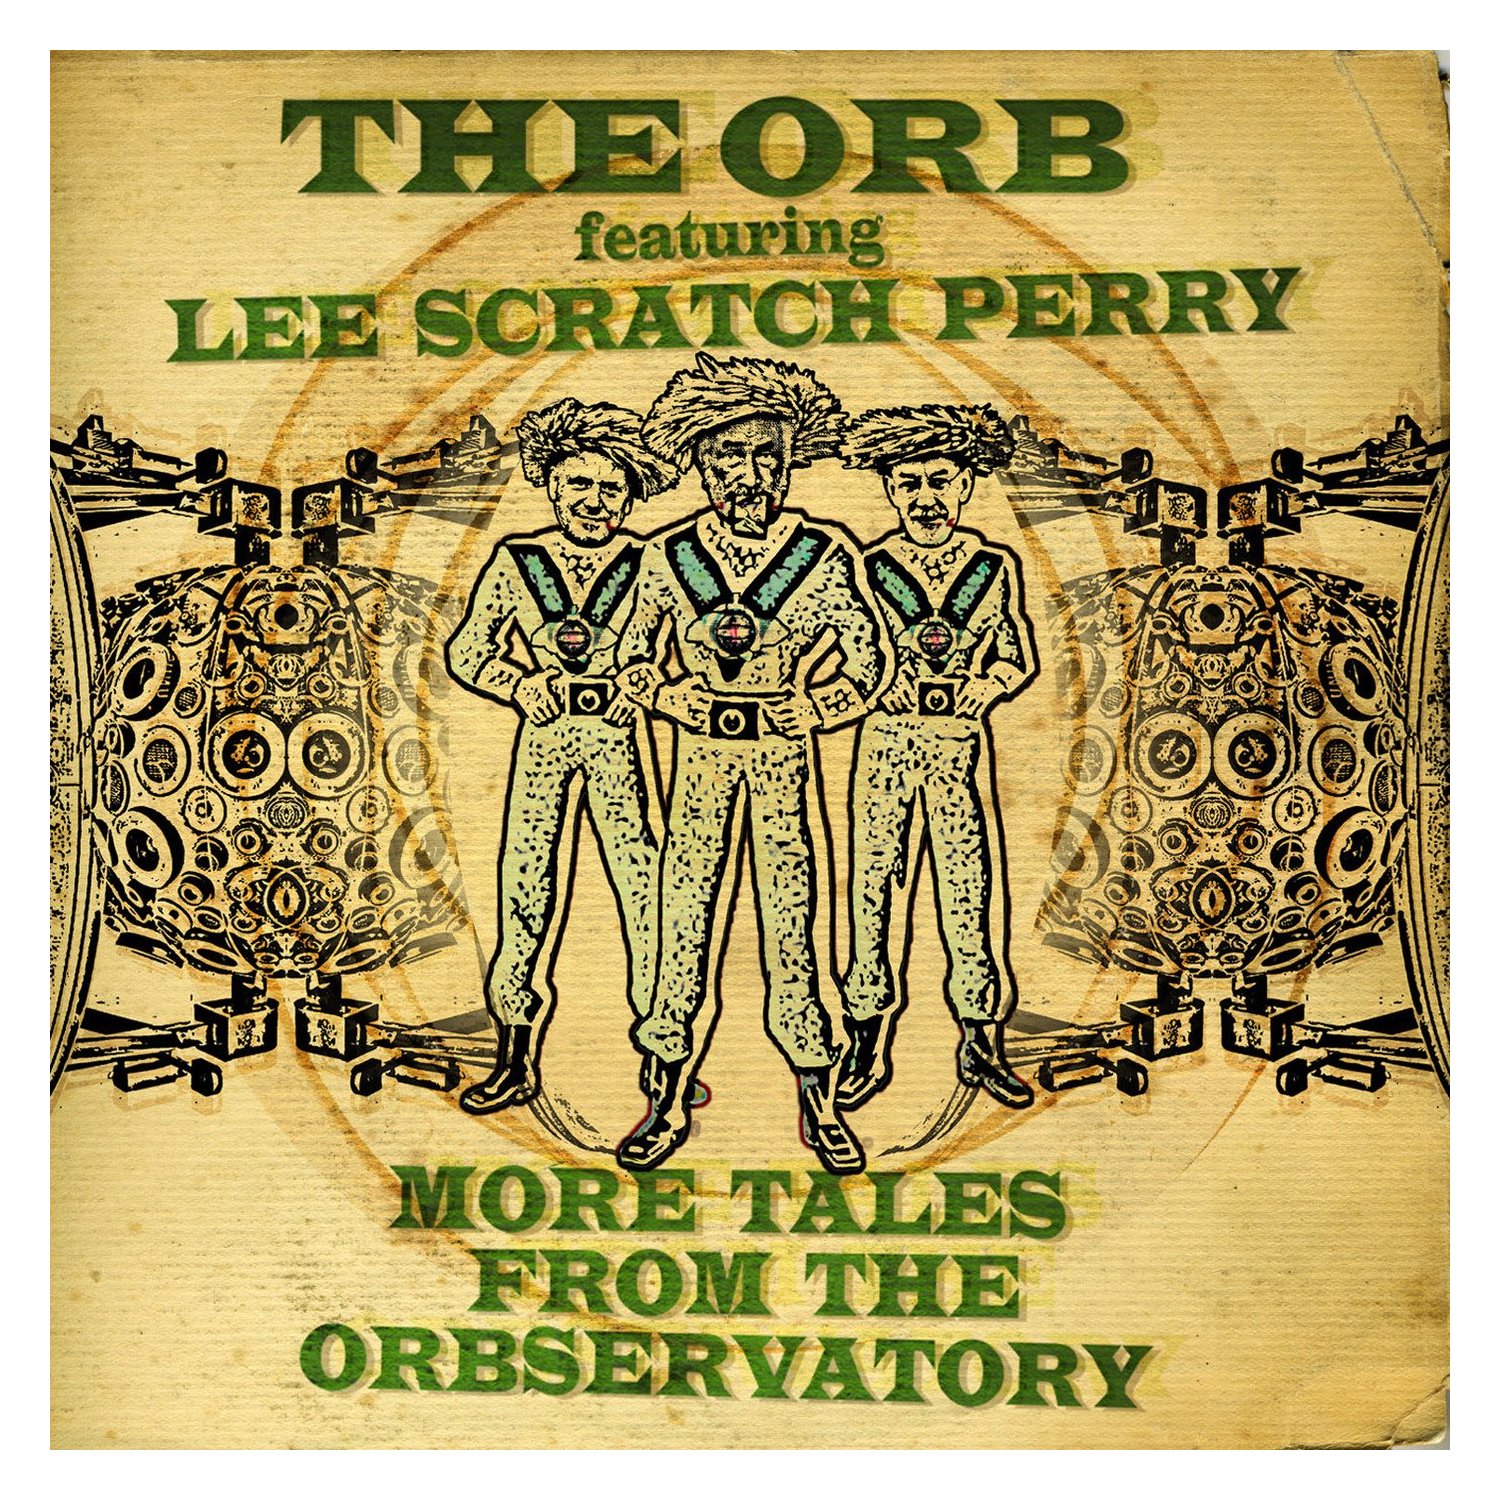 News Added Apr 02, 2013 The Orb are back with dub step veteran Lee ‘Scratch’ Perry to present, ‘More Tales From The Orbservatory’, a collection of instrumental and new tracks the legendary collaboration recorded in Berlin last year. Known for spawning the genre of ambient house, The Orb, and dub step mastermind Lee ‘Scratch’ Perry […]